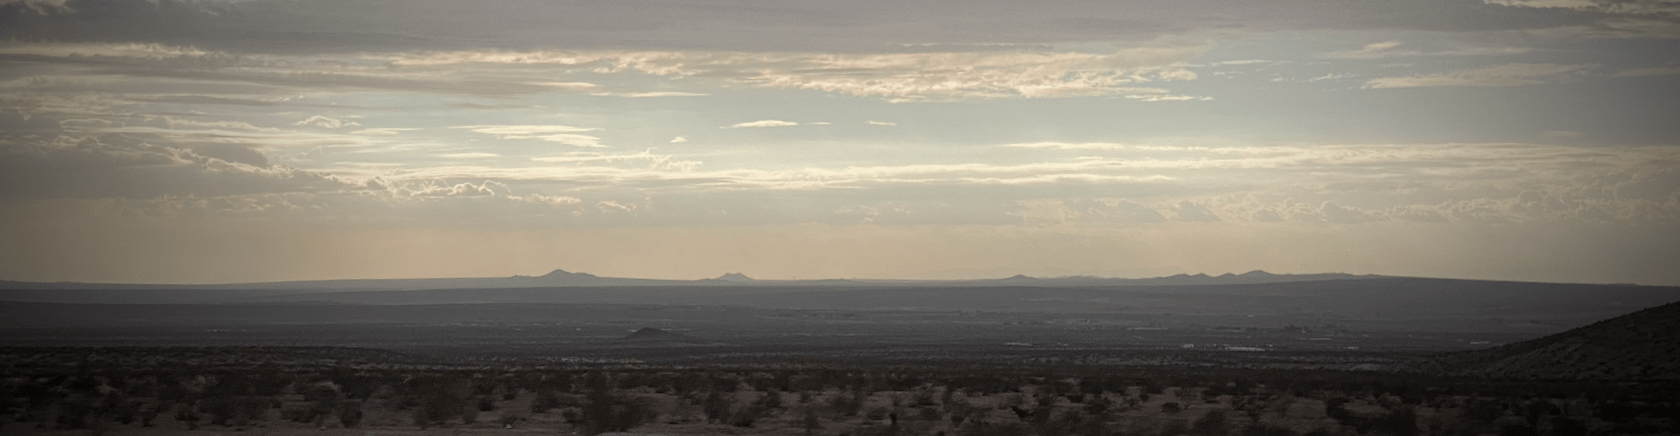 A wide shot of a desert vista, with scrub on the ground and golden light in the sky from the sunset